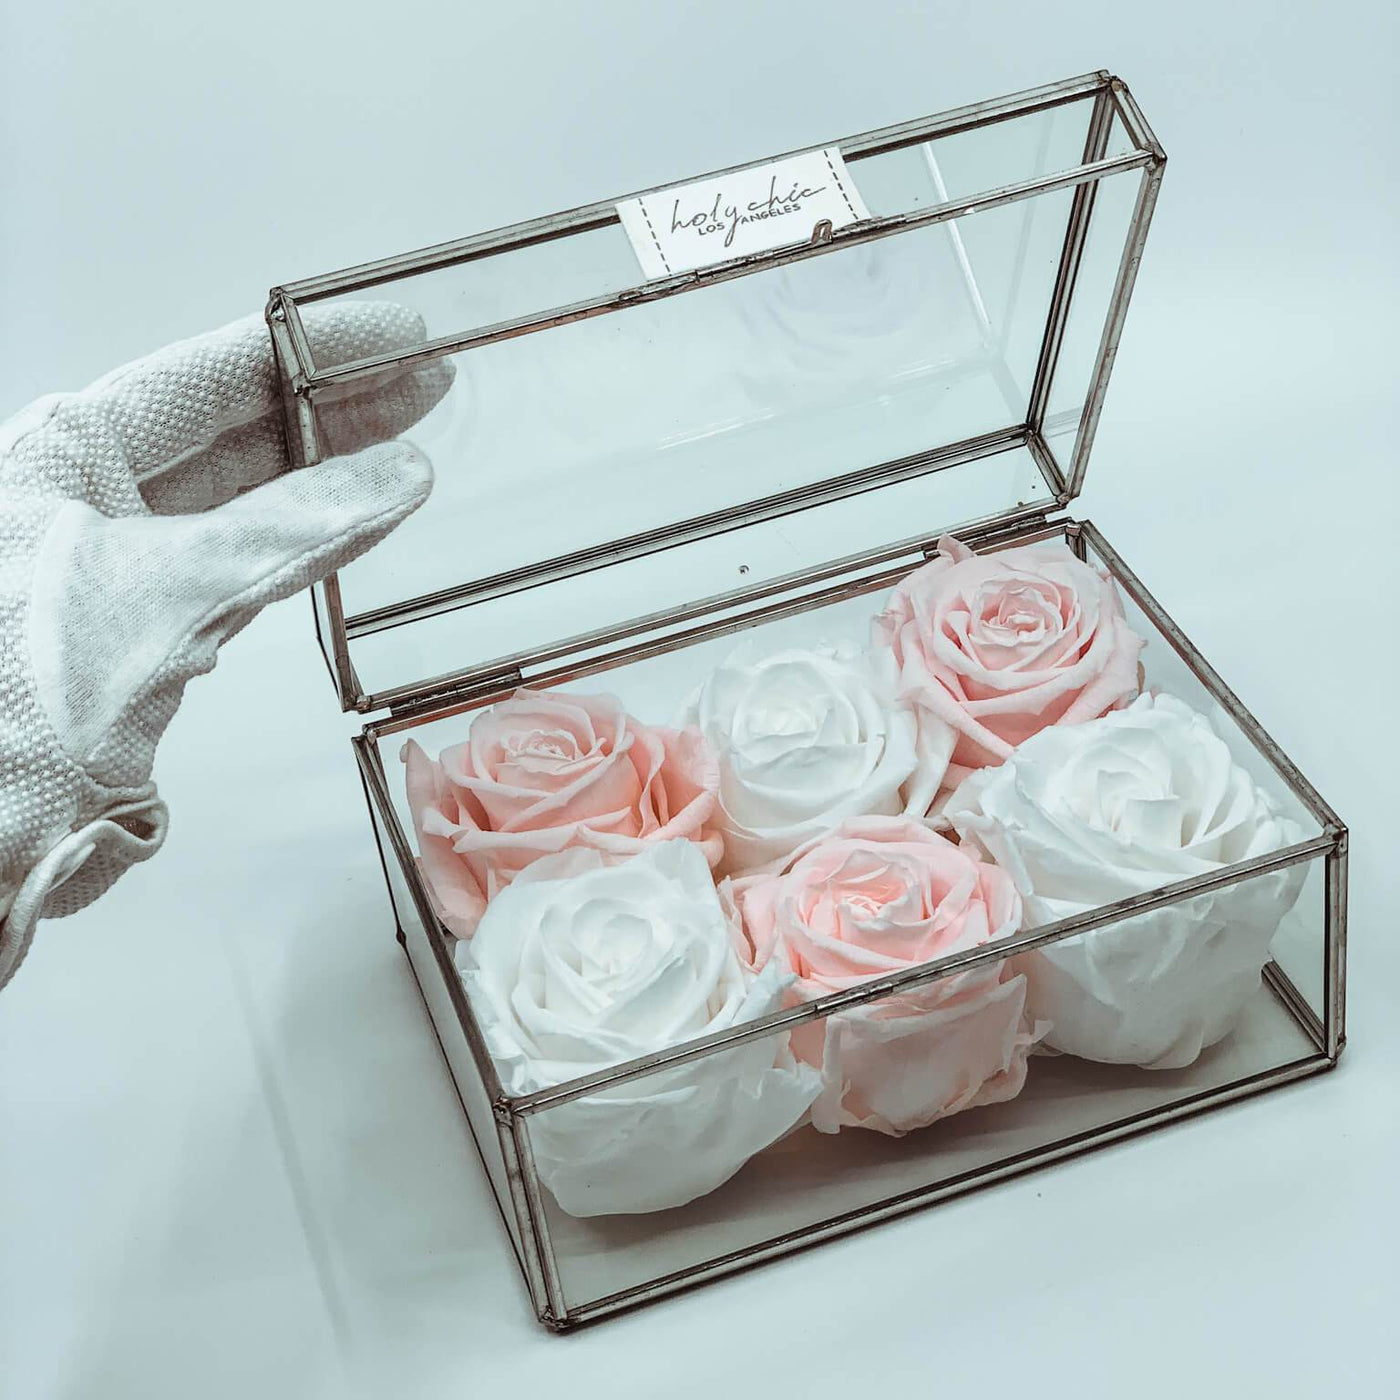 Forever roses set in a small clear glass jewelry box